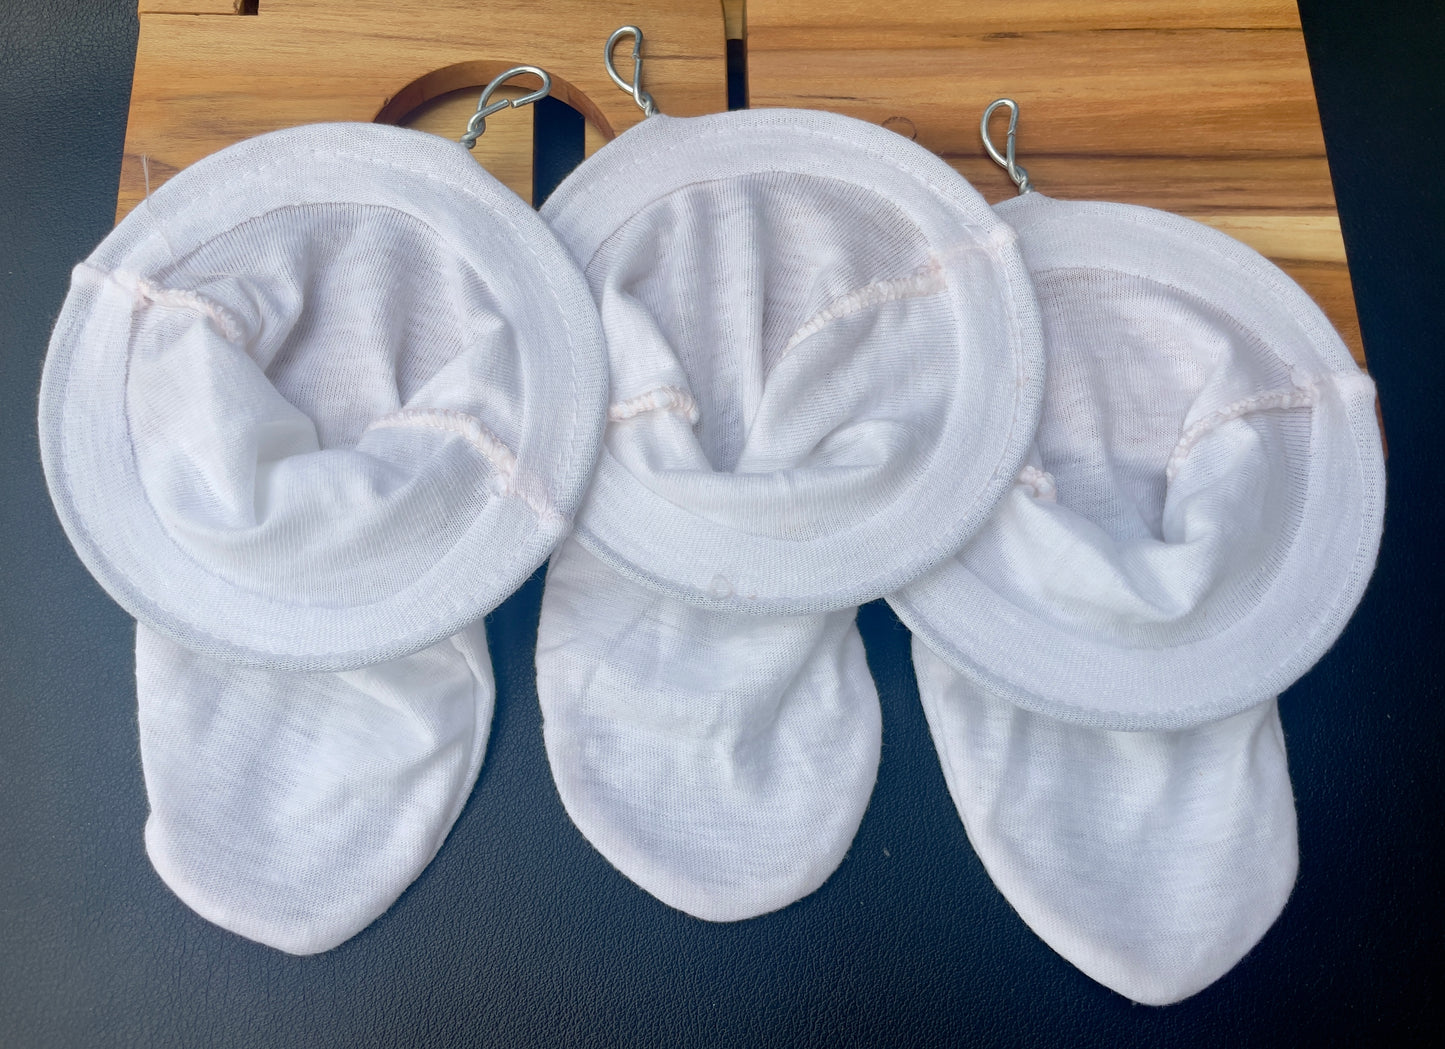 3 Standard Sized Cloth Coffee Filters